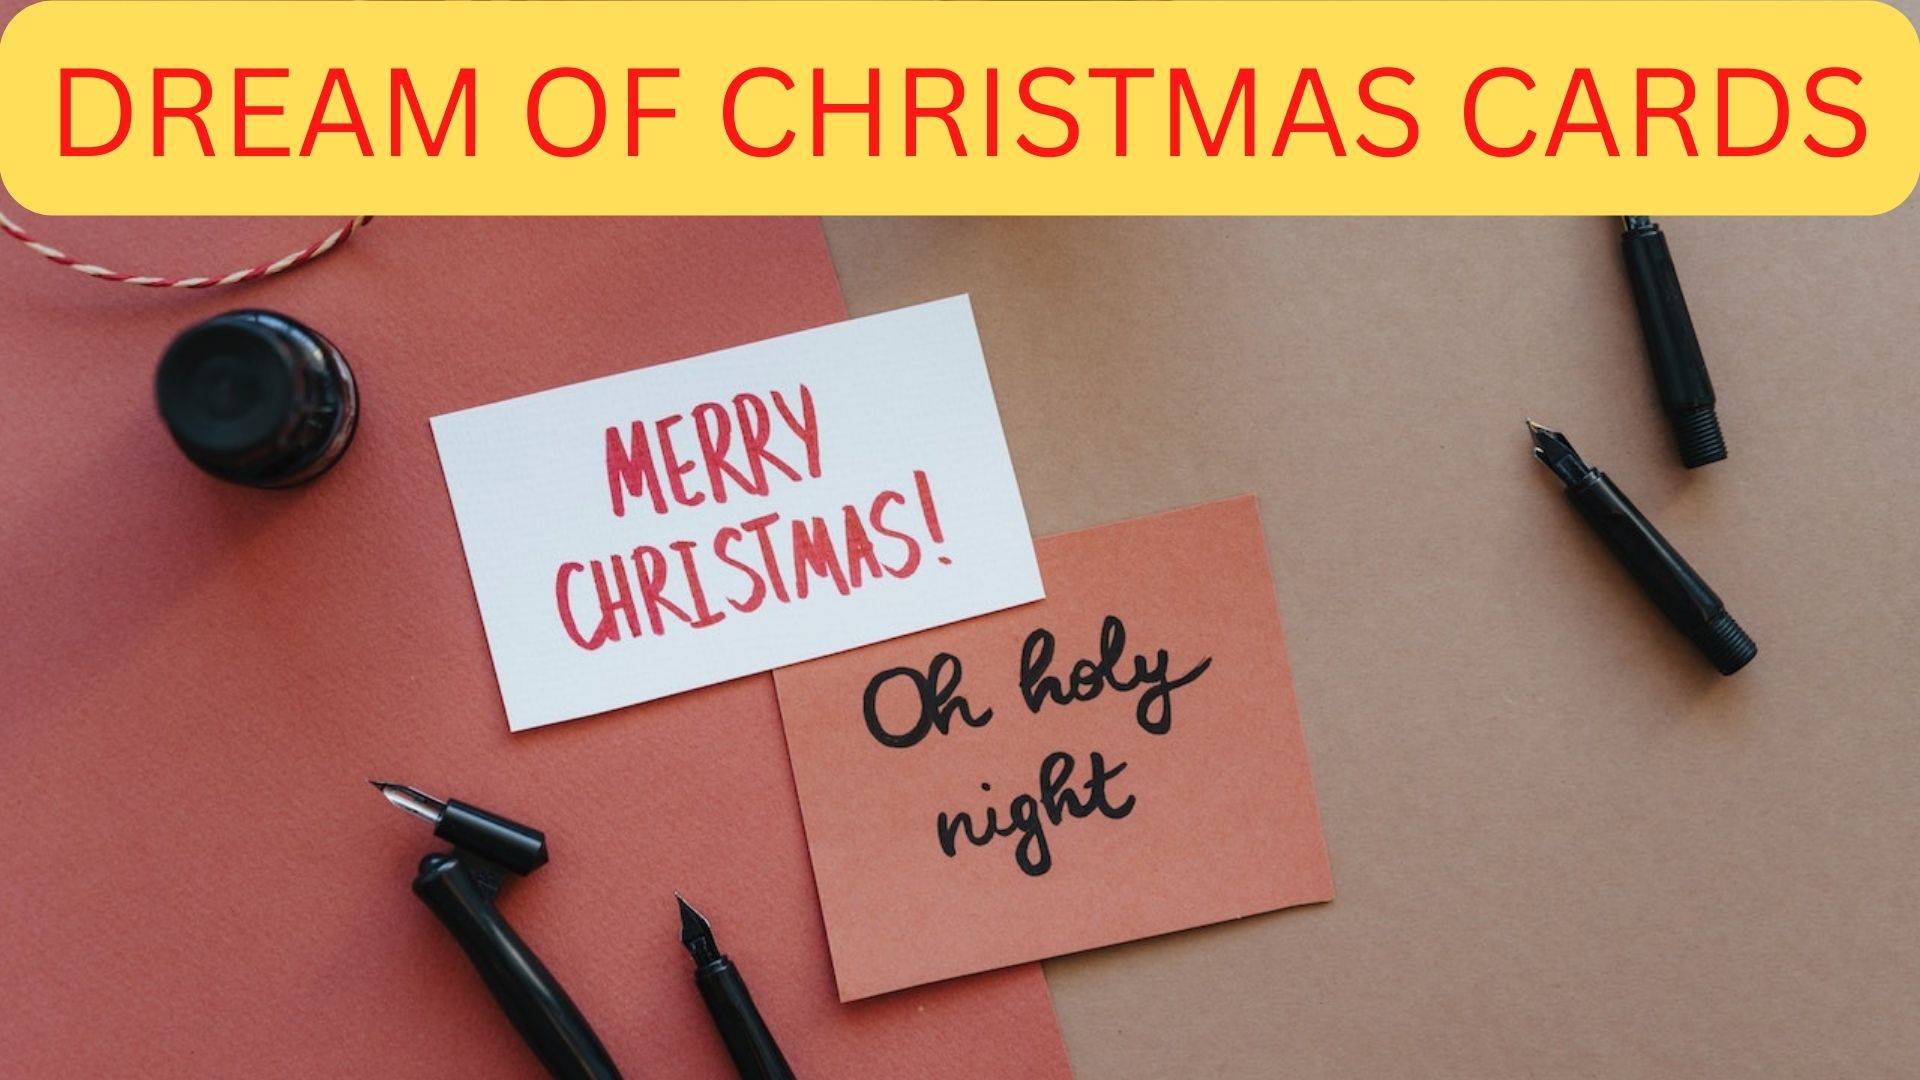 Dream Of Christmas Cards - A Symbol Of Sharing And Charity